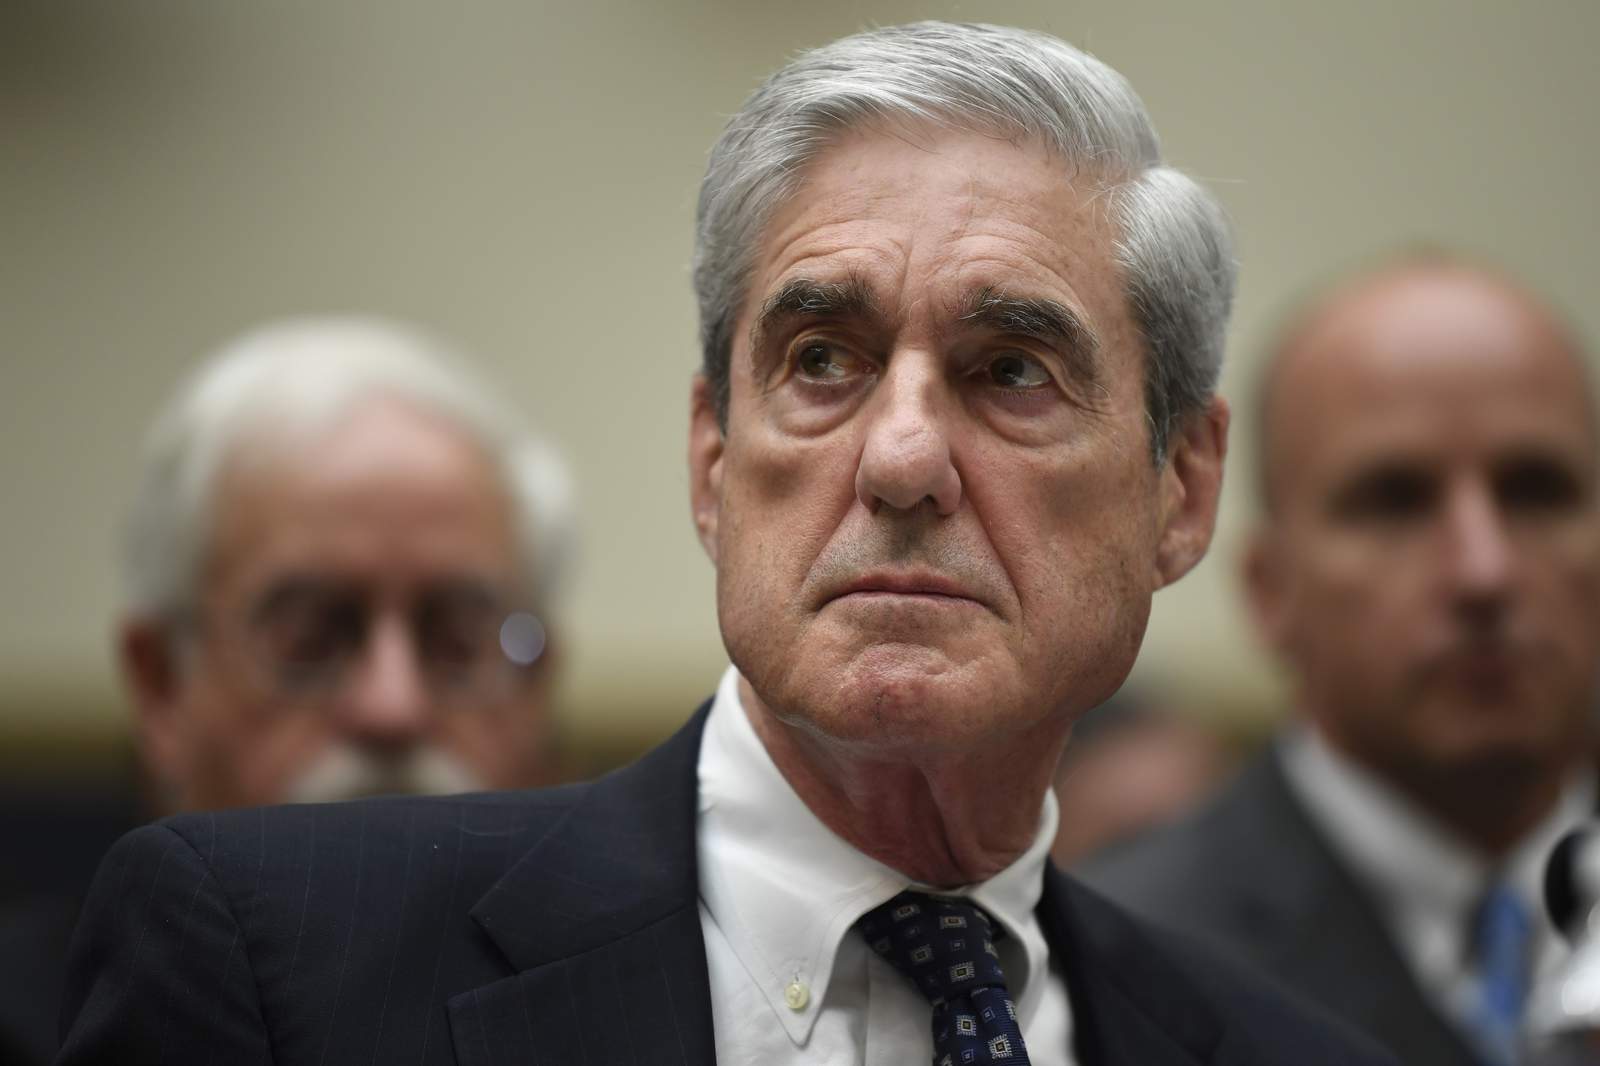 Mueller pushes back on criticism from lawyer on Russia team